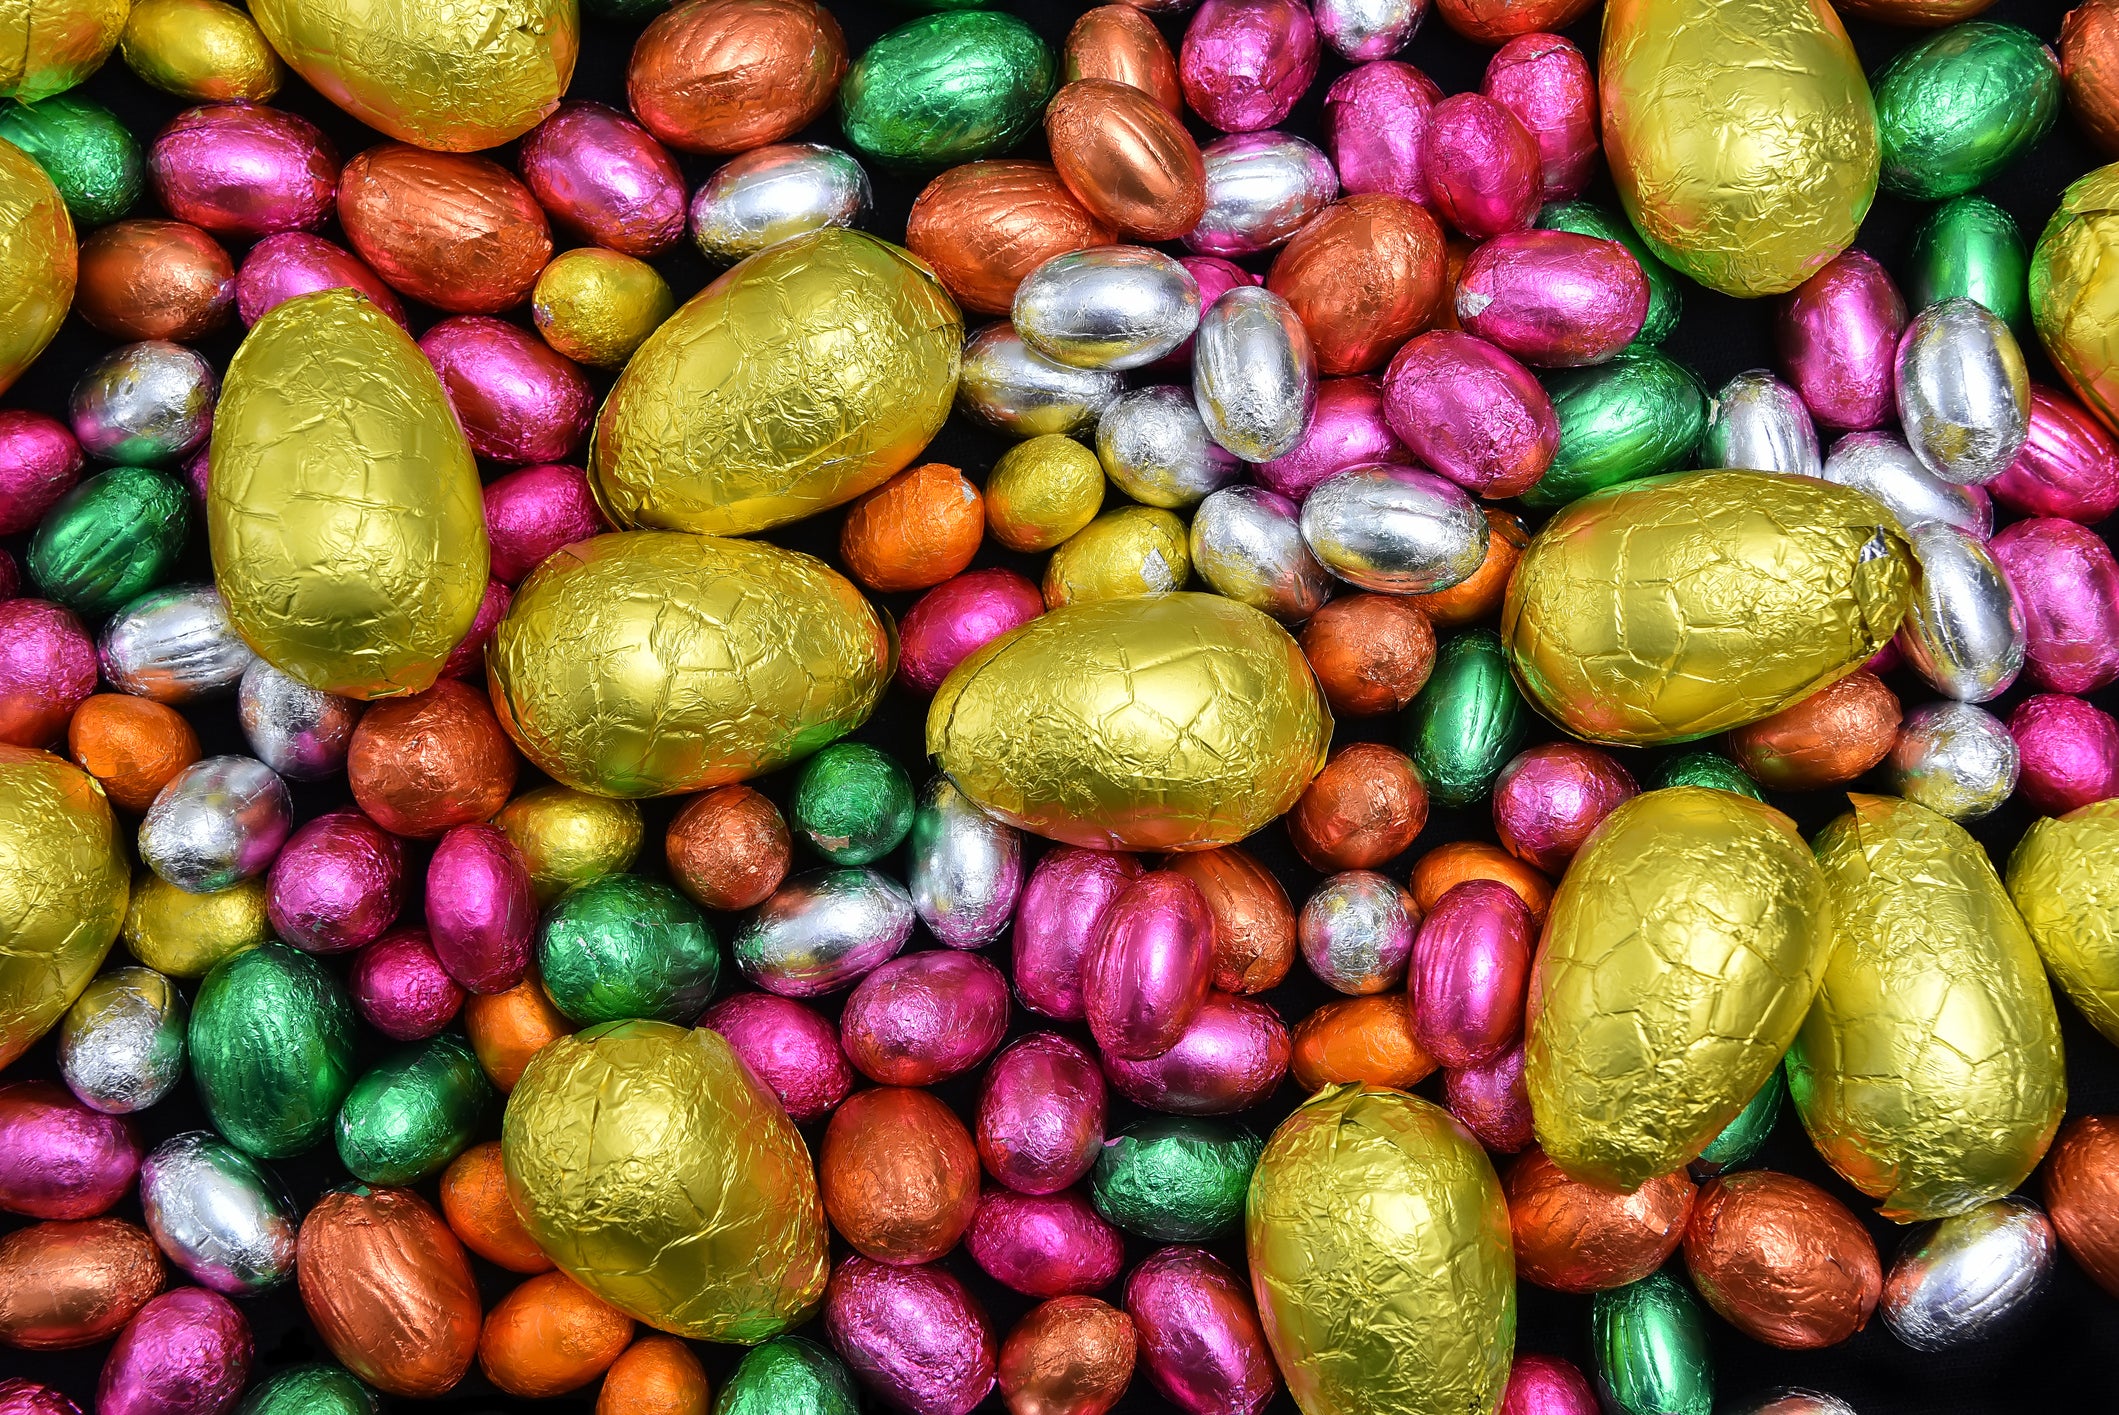 The price of Easter eggs has gone up by 50 per cent since last year